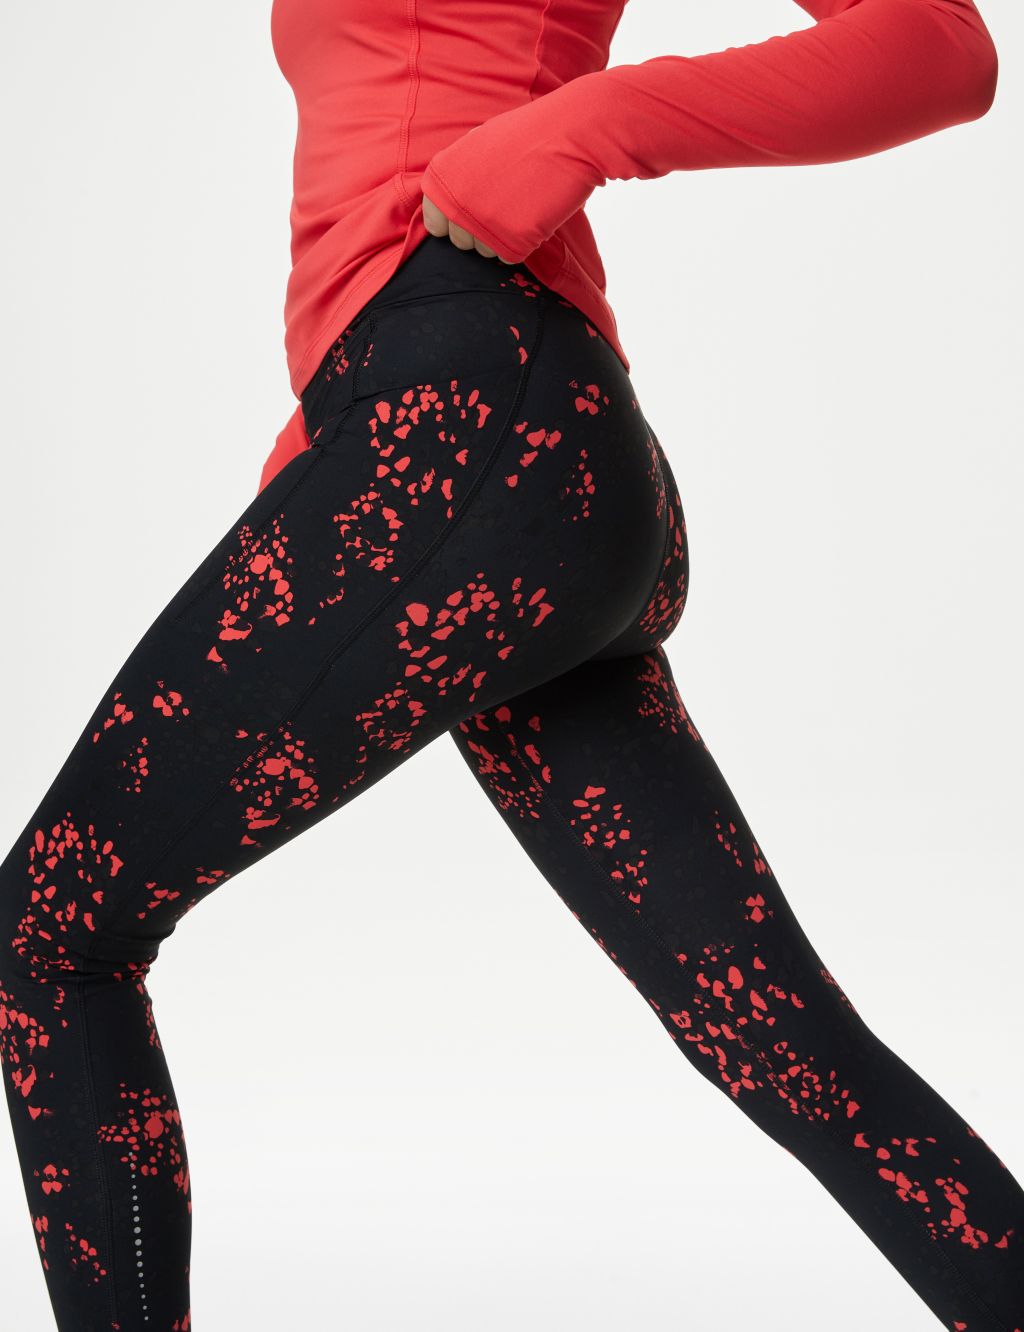 Women's Red Trousers